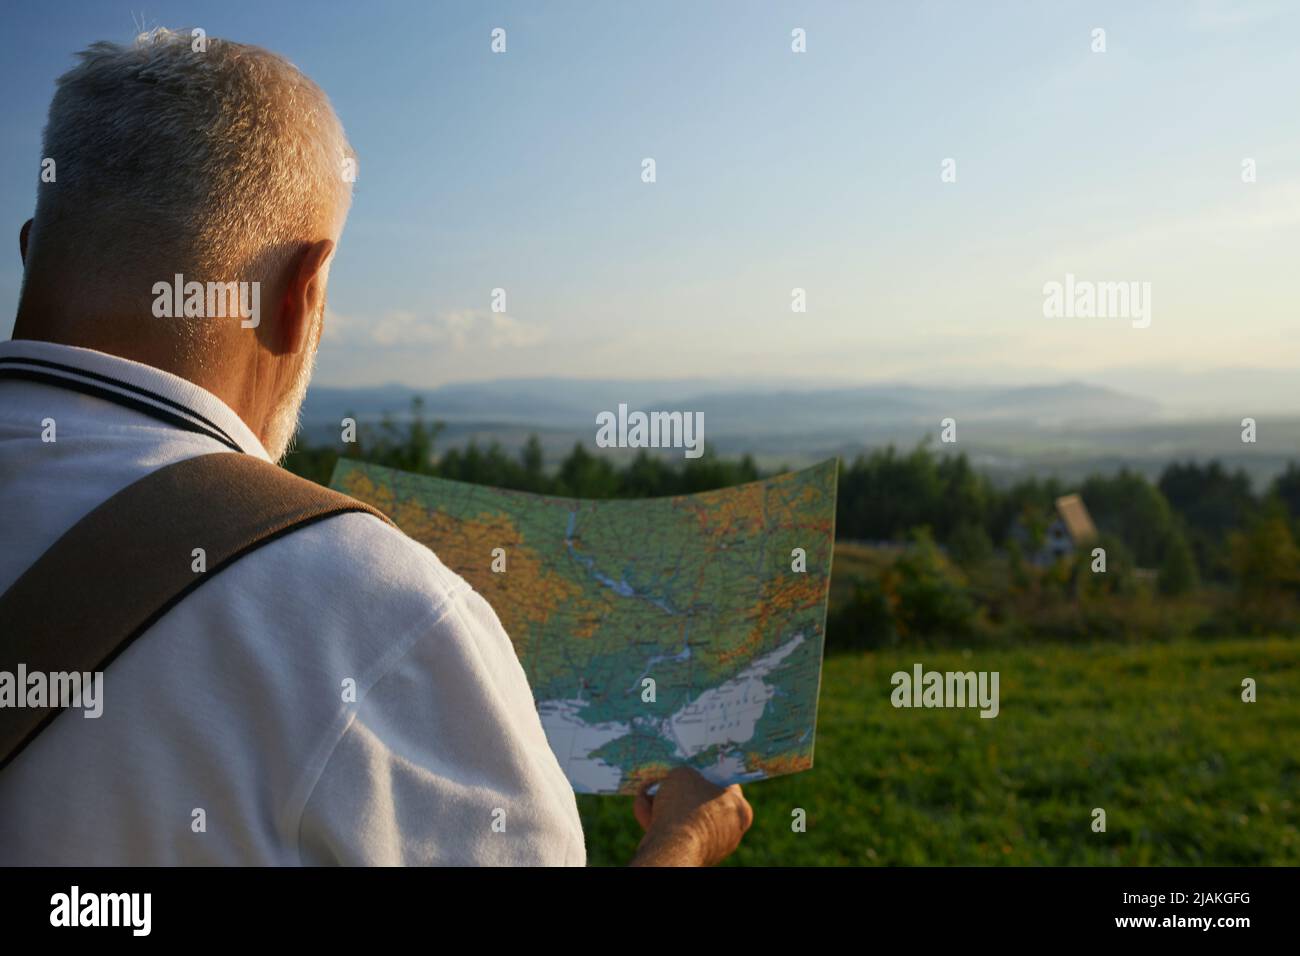 Adult male hiker checking touristic map, during mountain trip in summer. Back view of retired man holding map, looking for route, while hiking, with scenic landscape on background. Concept of tourism. Stock Photo